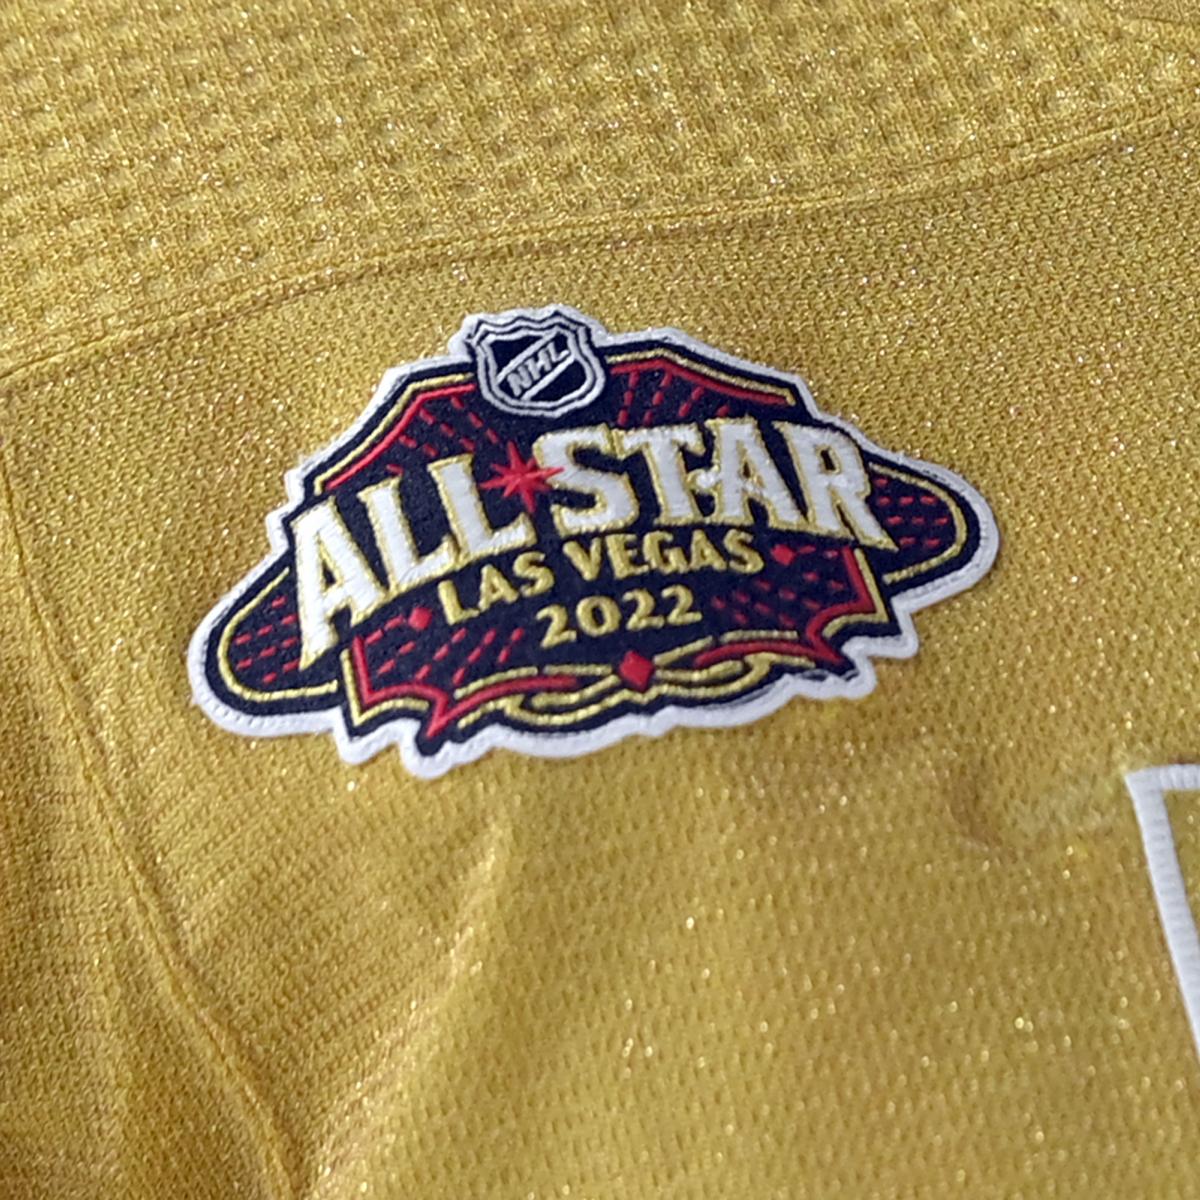 NHL All-Star Skills Competition 2022: Date, TV Schedule, Format, Events